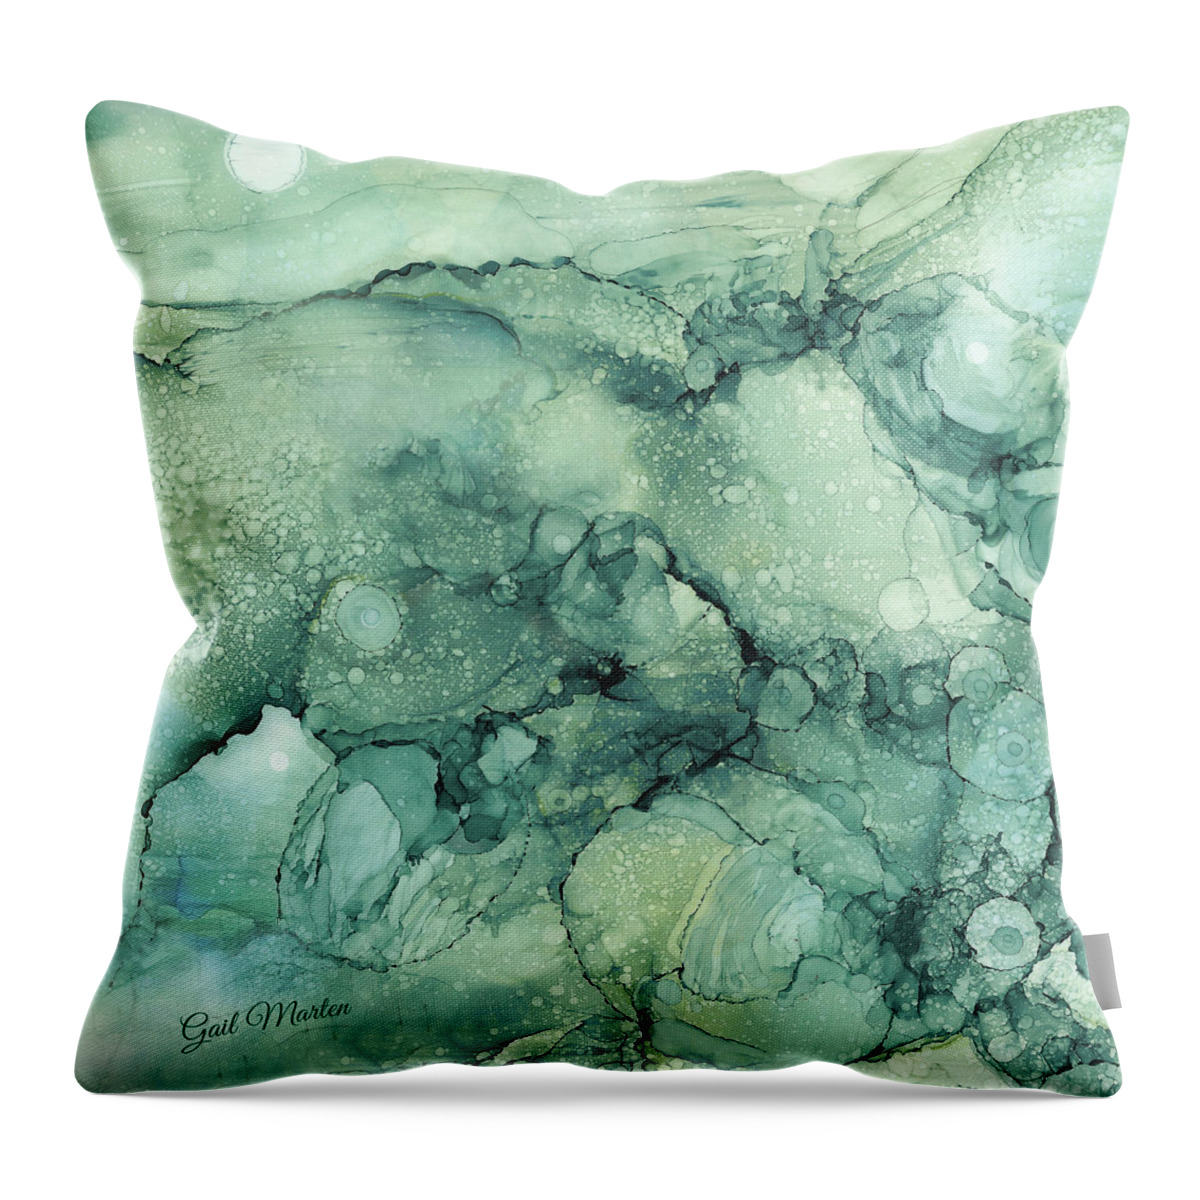 Ocean Throw Pillow featuring the painting Sea World 1 by Gail Marten